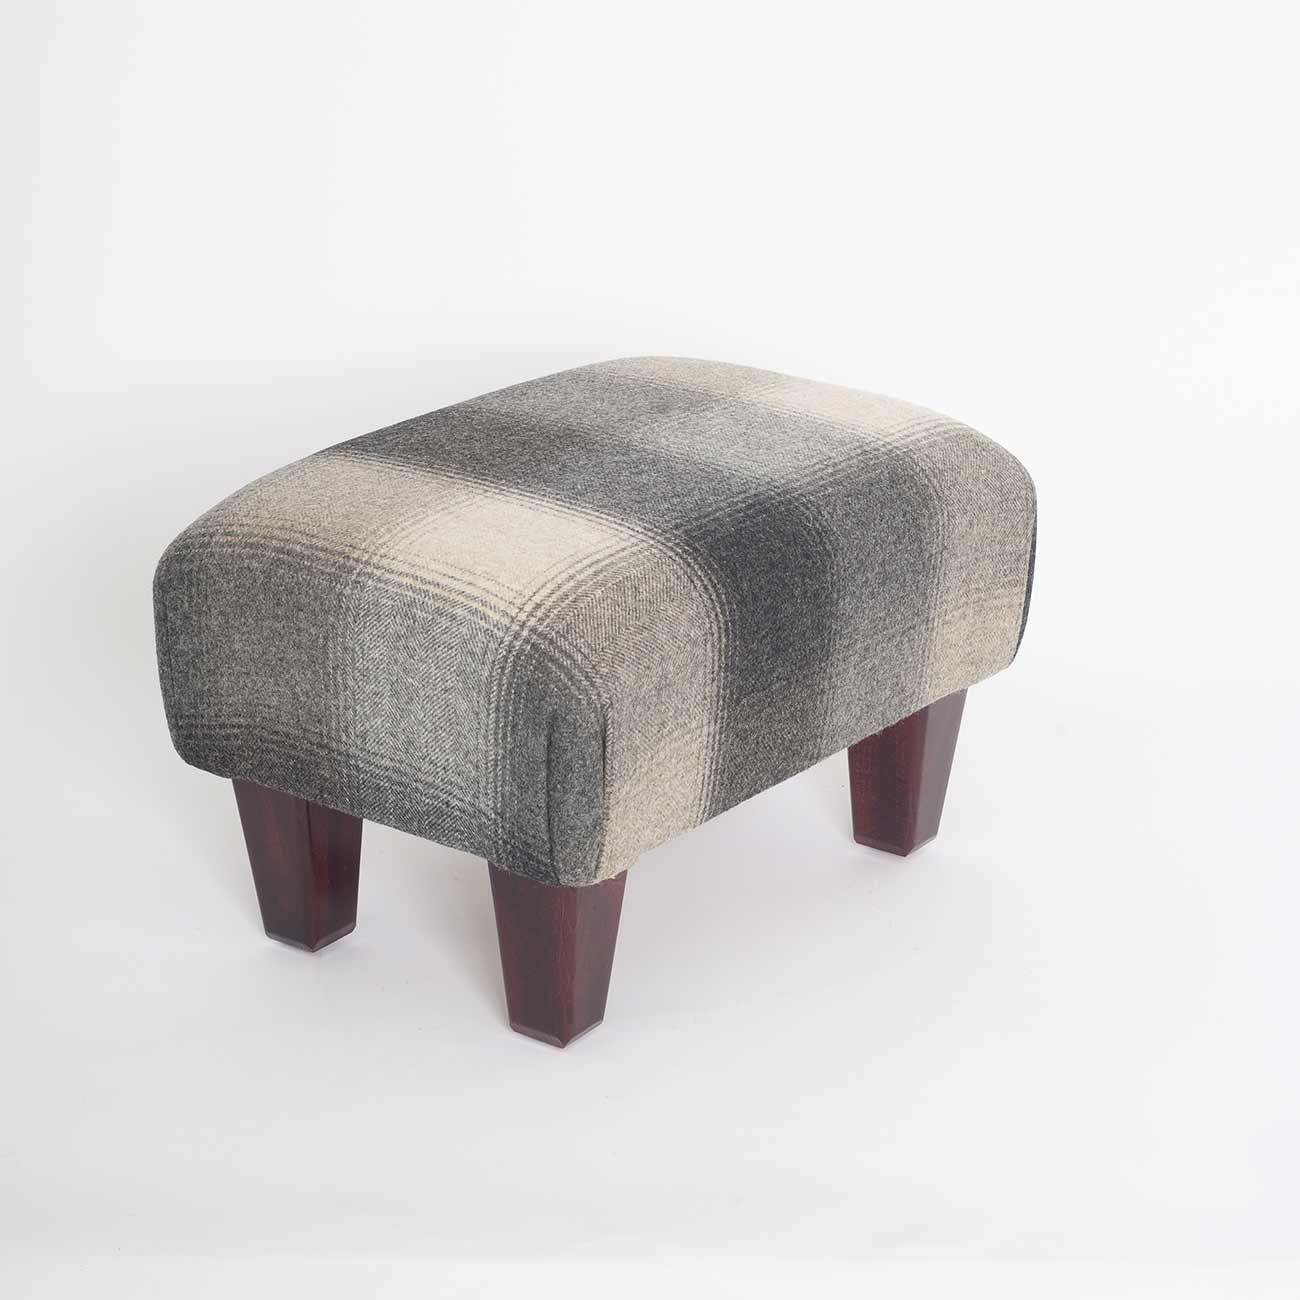 grey-squares-footstool6 fabric from JLP